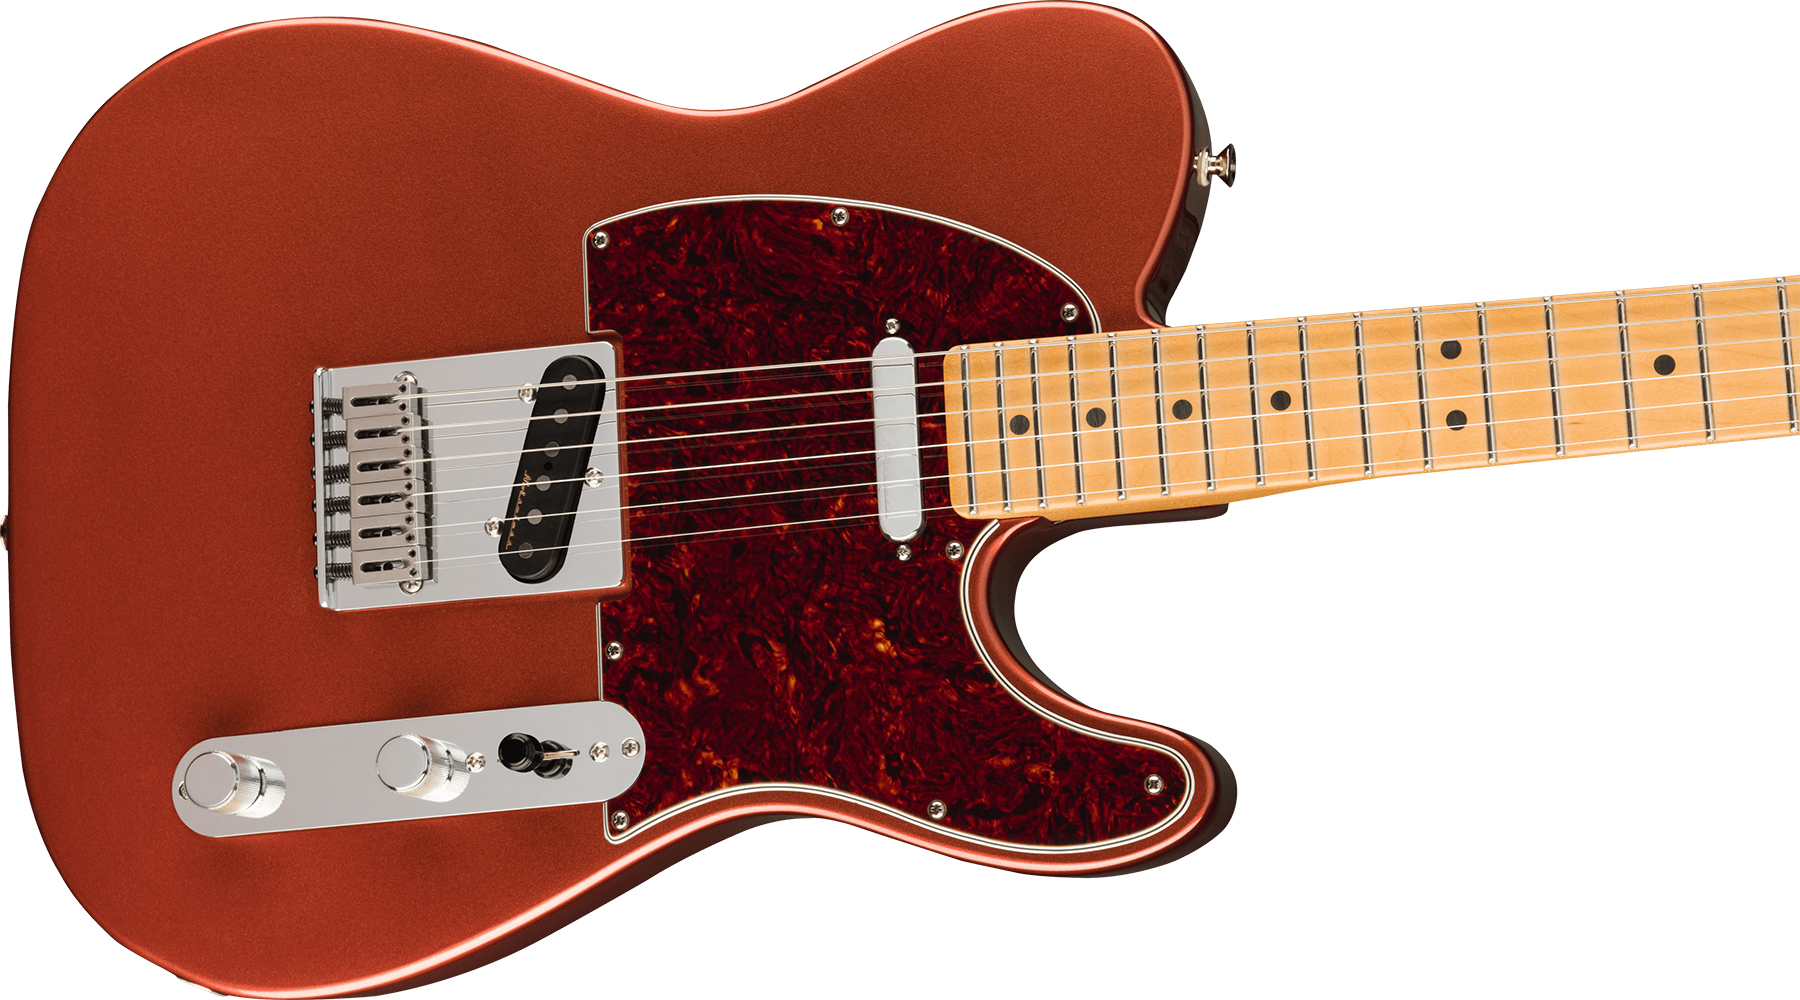 Fender Tele Player Plus Mex 2s Ht Mn - Aged Candy Apple Red - E-Gitarre in Teleform - Variation 2